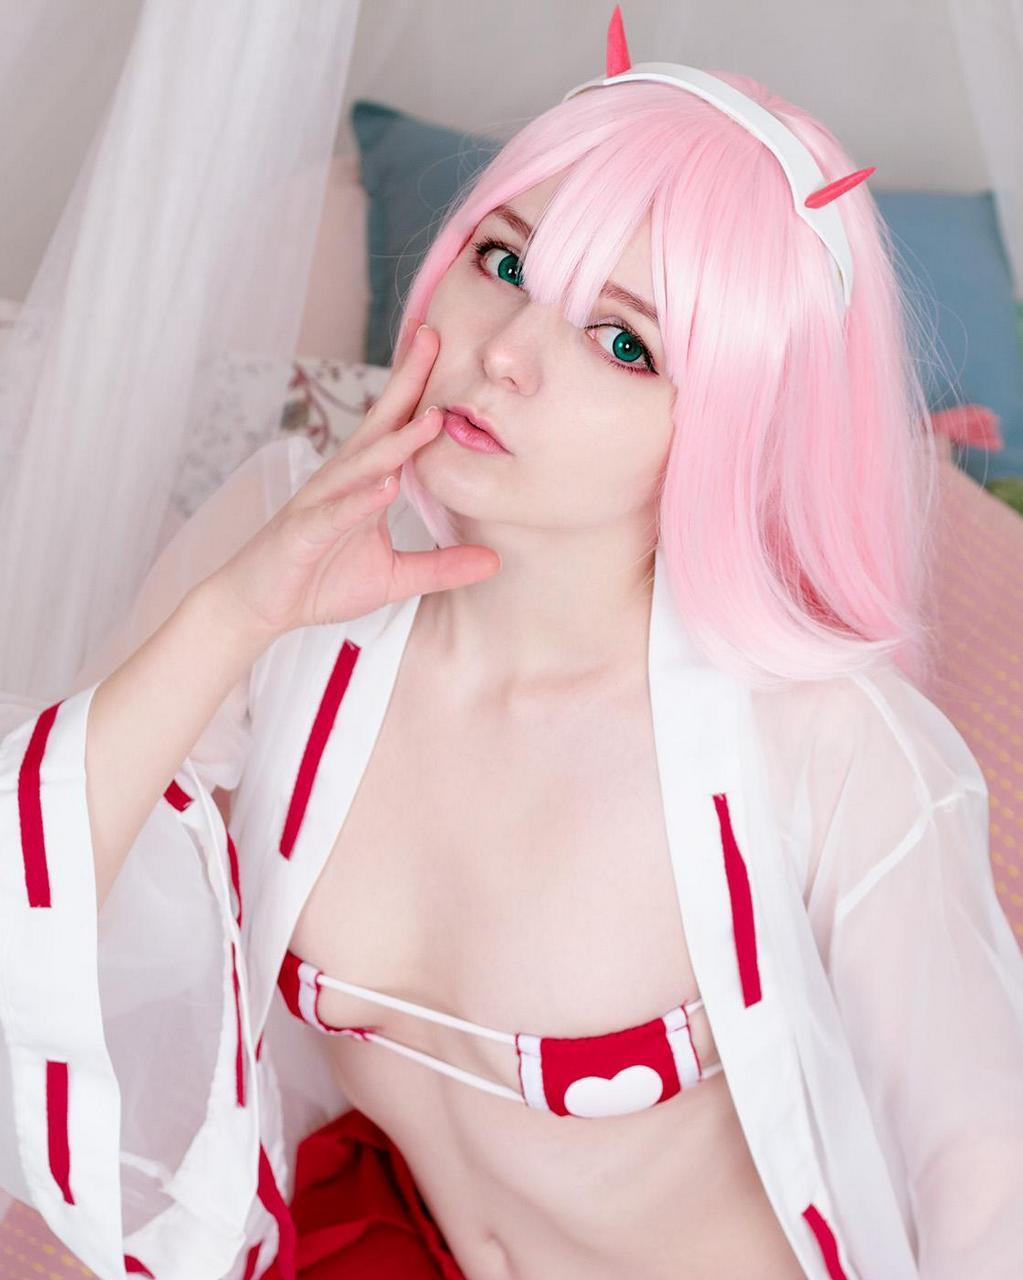 Zerotwo From Darling In The Franxx By Atamash